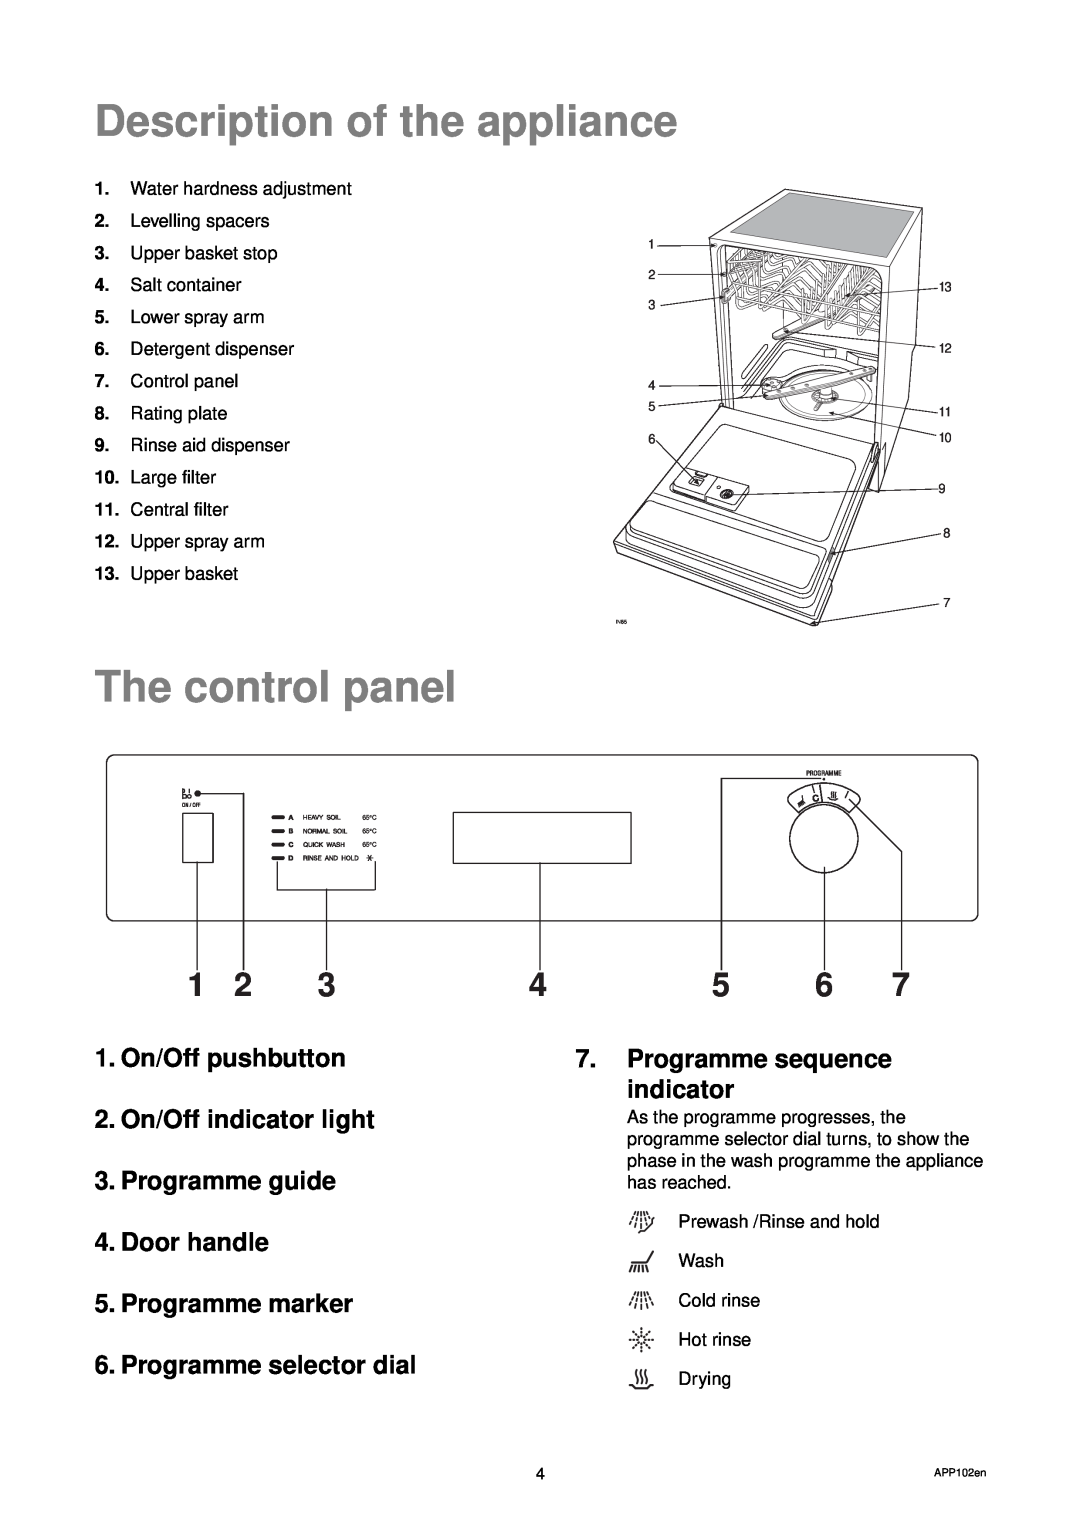 Zanussi ZD 684 manual Description of the appliance, The control panel, 1.On/Off pushbutton 2.On/Off indicator light 